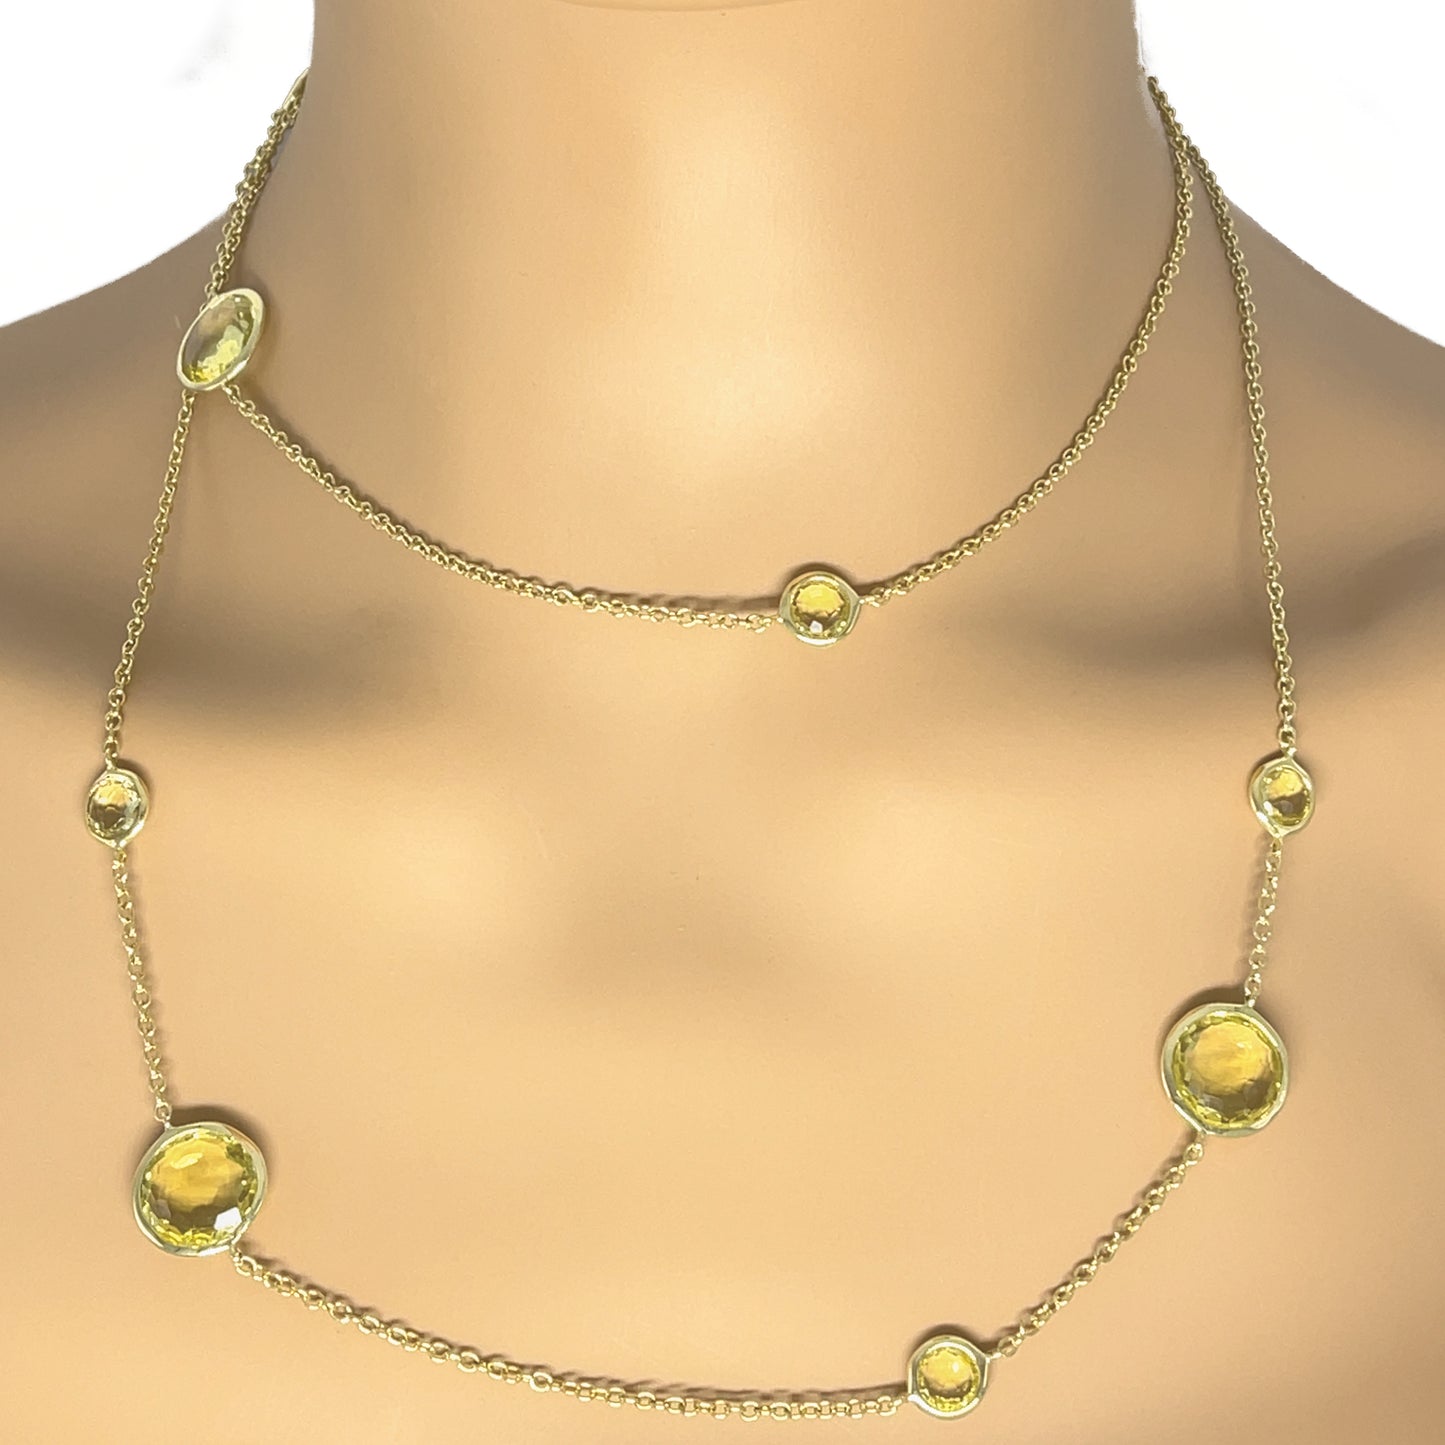 Ippolita Lollitini Rock Candy Goldent Citrine Long Necklace in 18k Yellow Gold